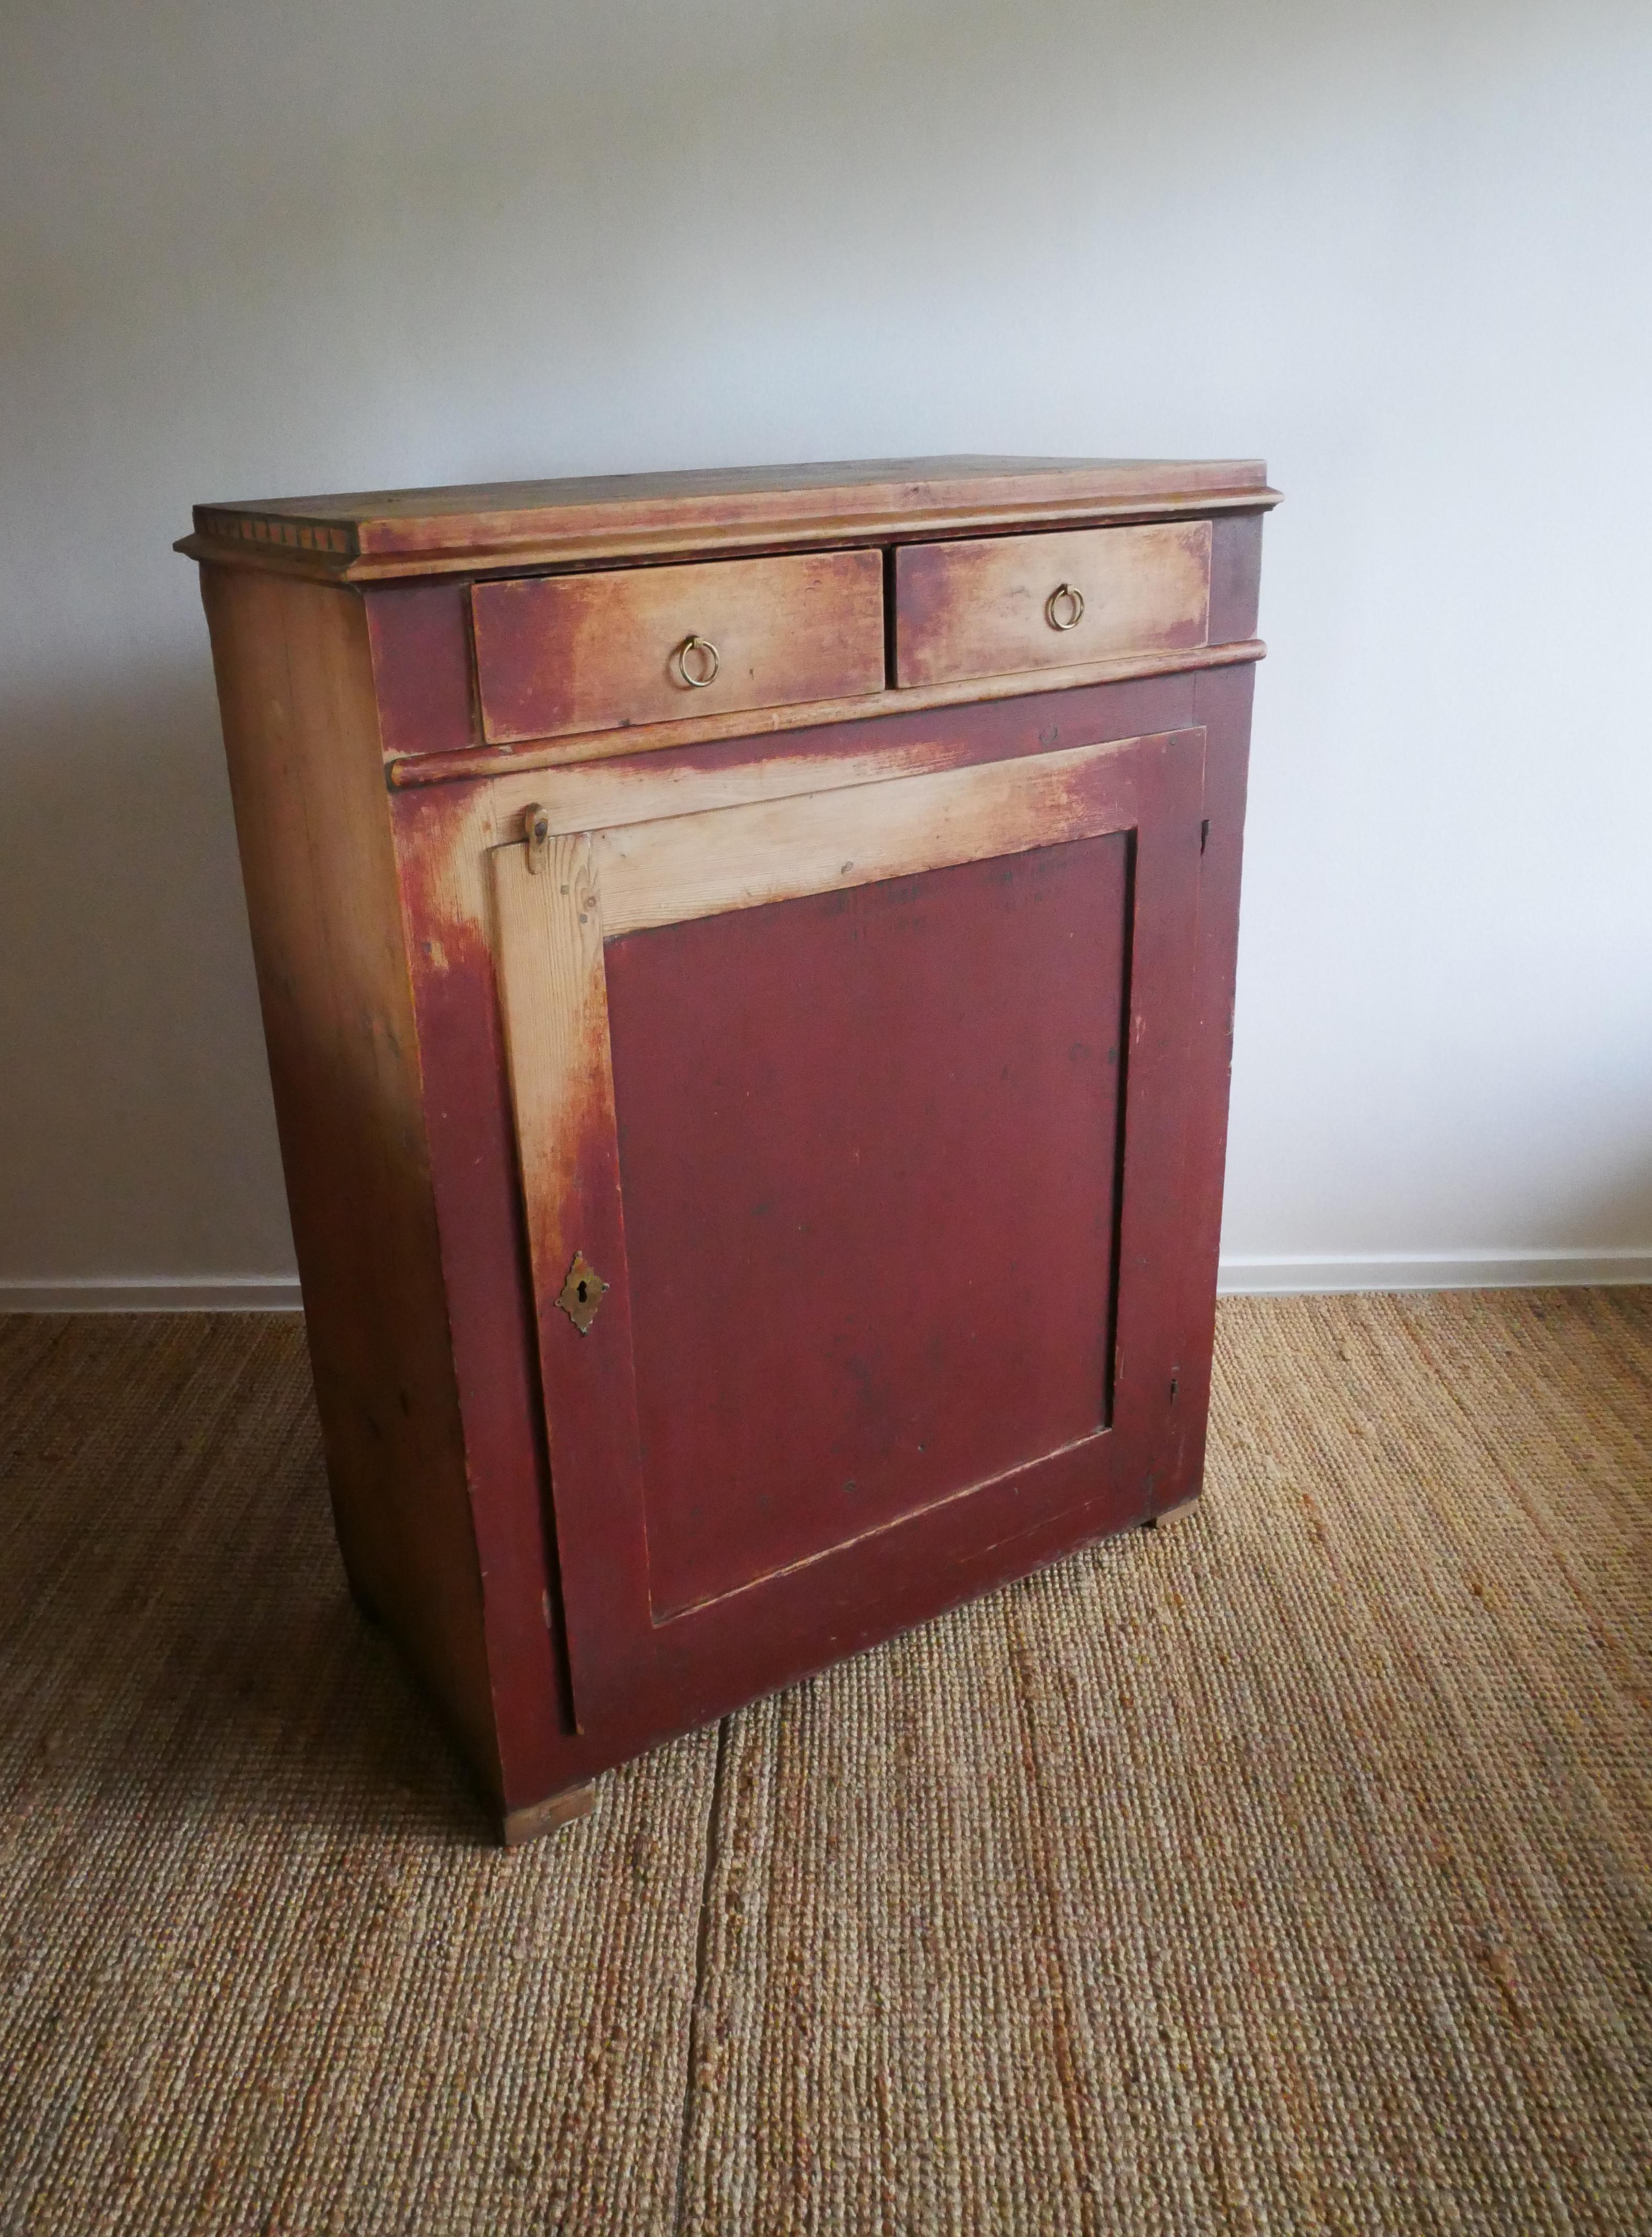 Swedish Farmers Cabinet from Jämtland in the mid-19th century.
Made of pine wood.

This cabinet has stood the test of time with its true essence.
The patina is so amazing with it’s soft gentle dark red color and the smoothness that only time and